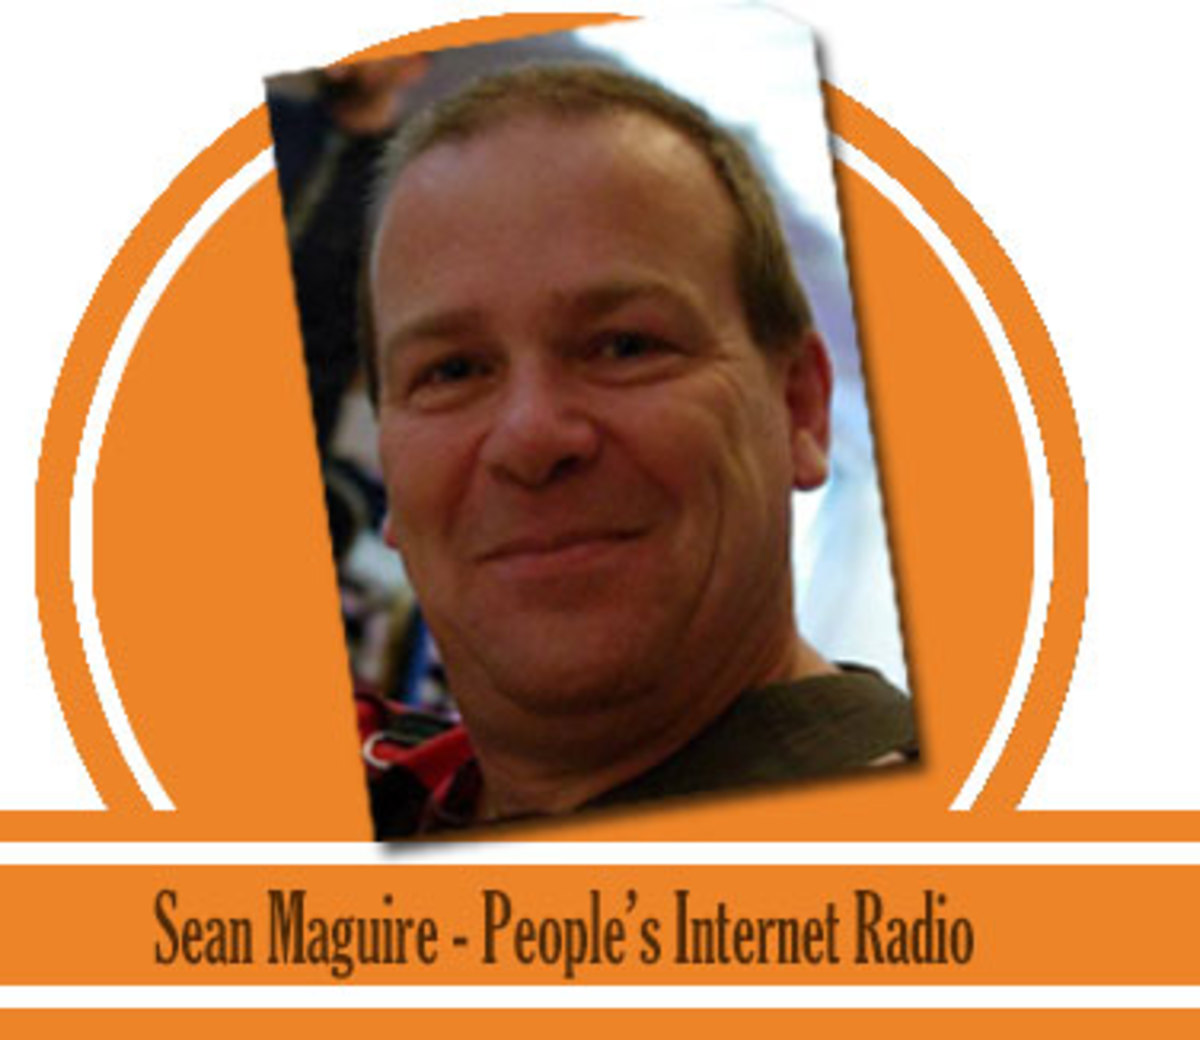 Sean Maguire, Peoples Internet Radio. Thank you for finally giving us a voice. 